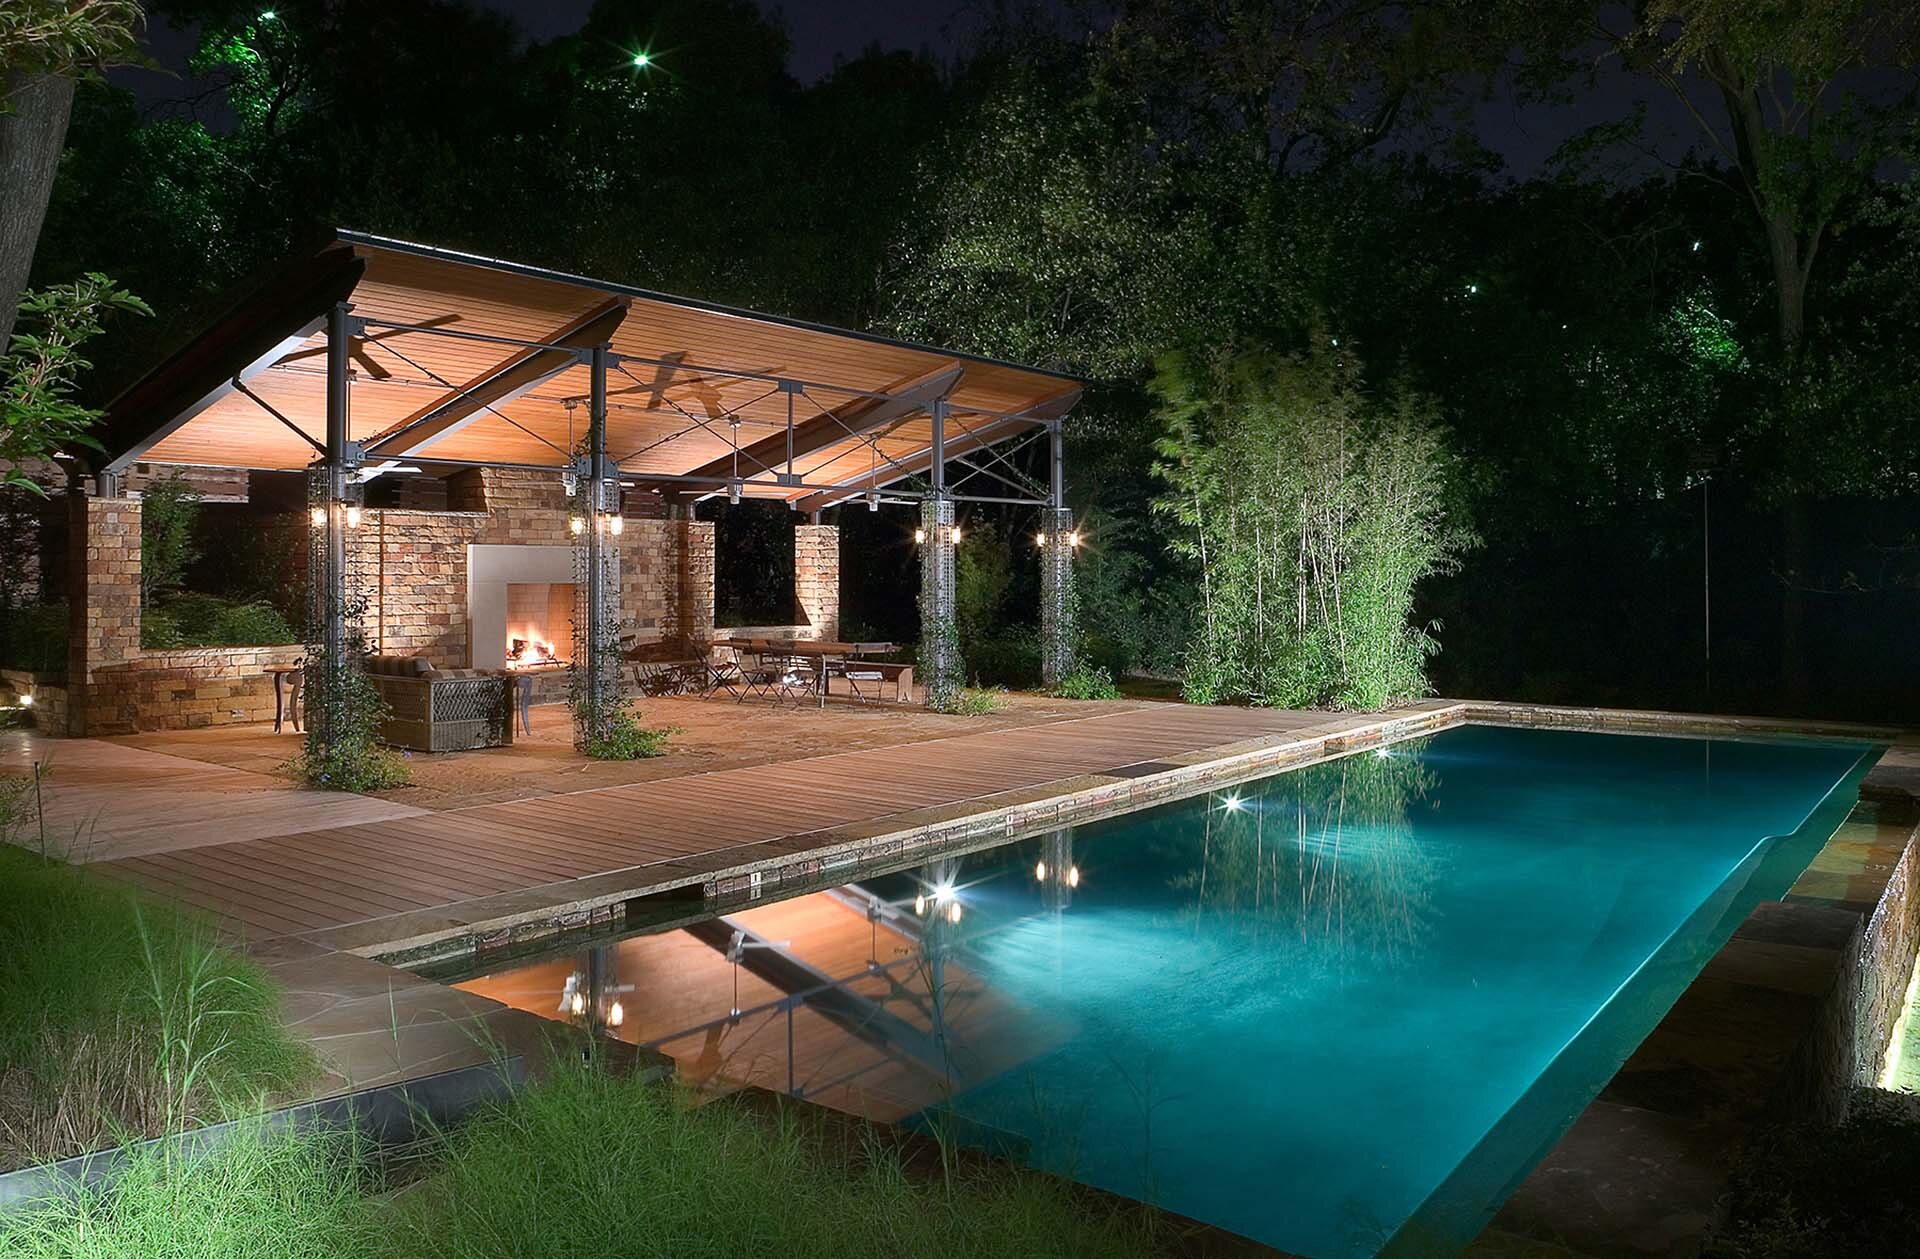  Modern comfortable contemporary home in Park Cities Dallas Texas featuring backyard oasis with a large pool and pavilion with fireplace 